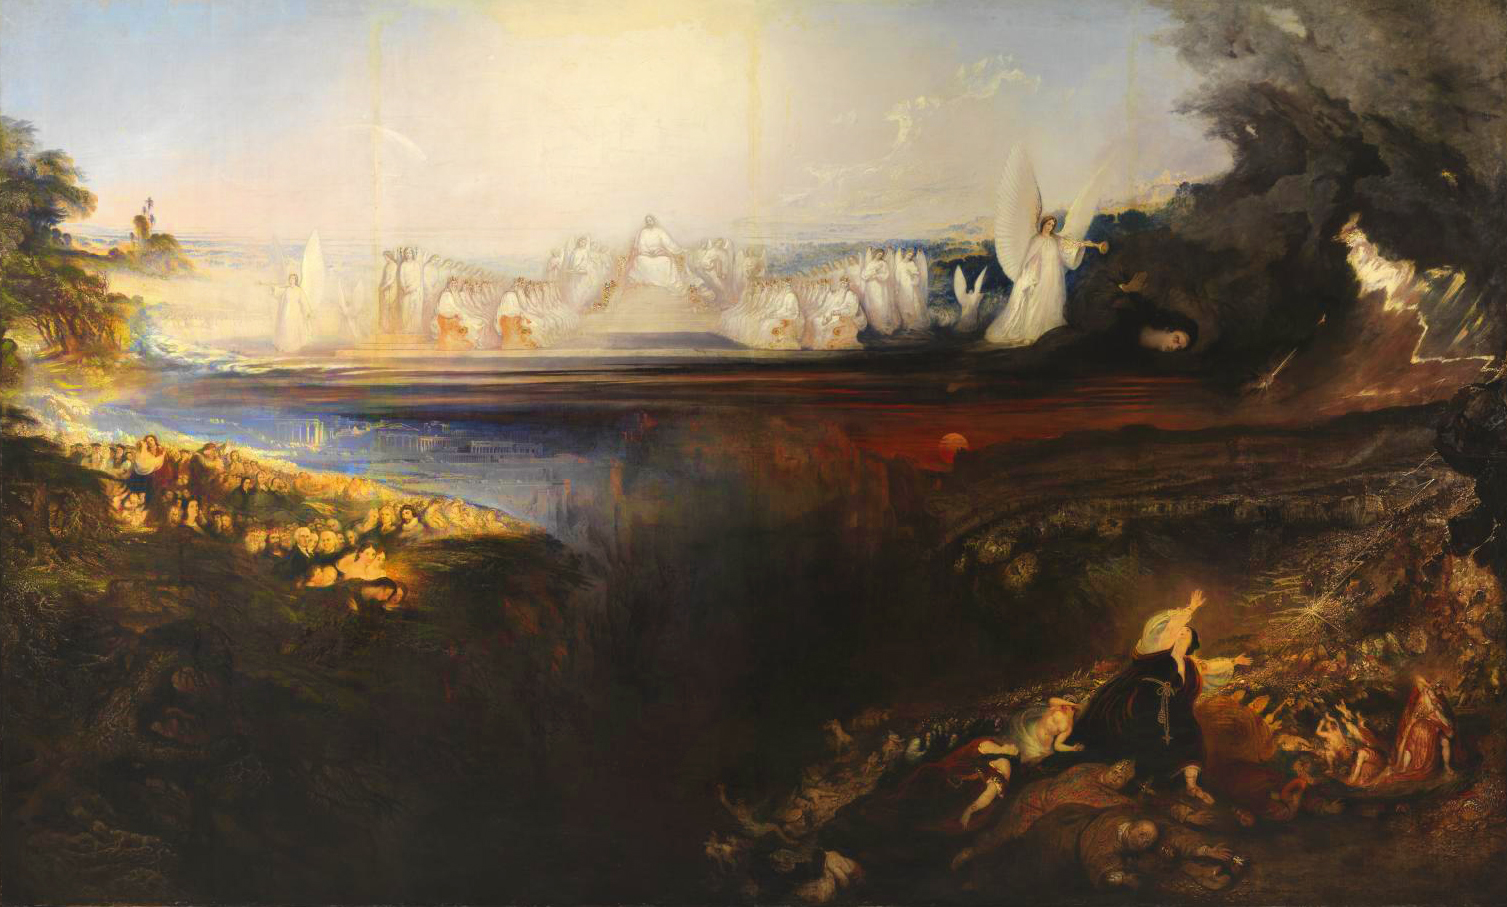 An image of an oil painting by the artist John Martin titled “The Great Day of His Wrath”. The painting is a landscape with a dramatic sky and a dark foreground. The sky is filled with white and gray clouds, and the sun is shining through the clouds. The foreground is a dark landscape with a river running through it. The painting is a representation of the biblical end of the world, with the sky filled with angels and the earth being destroyed. The painting is in the romanticism style and was created in 1851-1853. The painting is currently located in the Tate Gallery in London, UK.